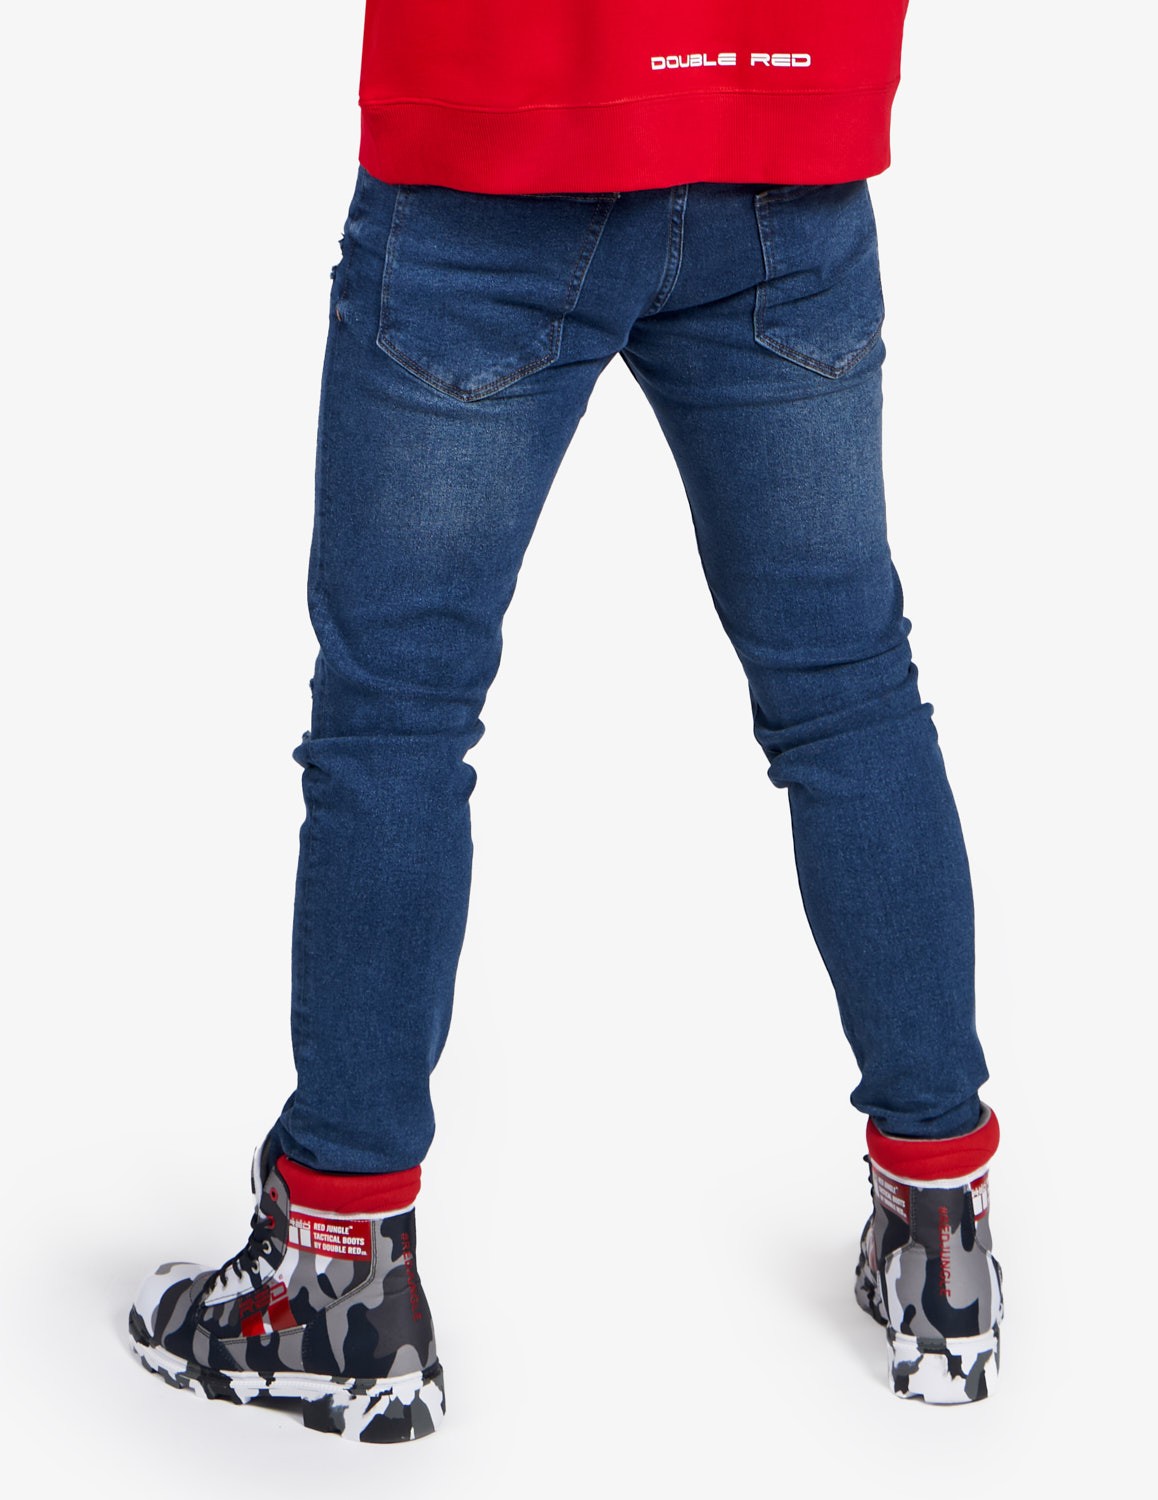 RED JEANS Regular Dark Blue Skinny Fit - Double Red